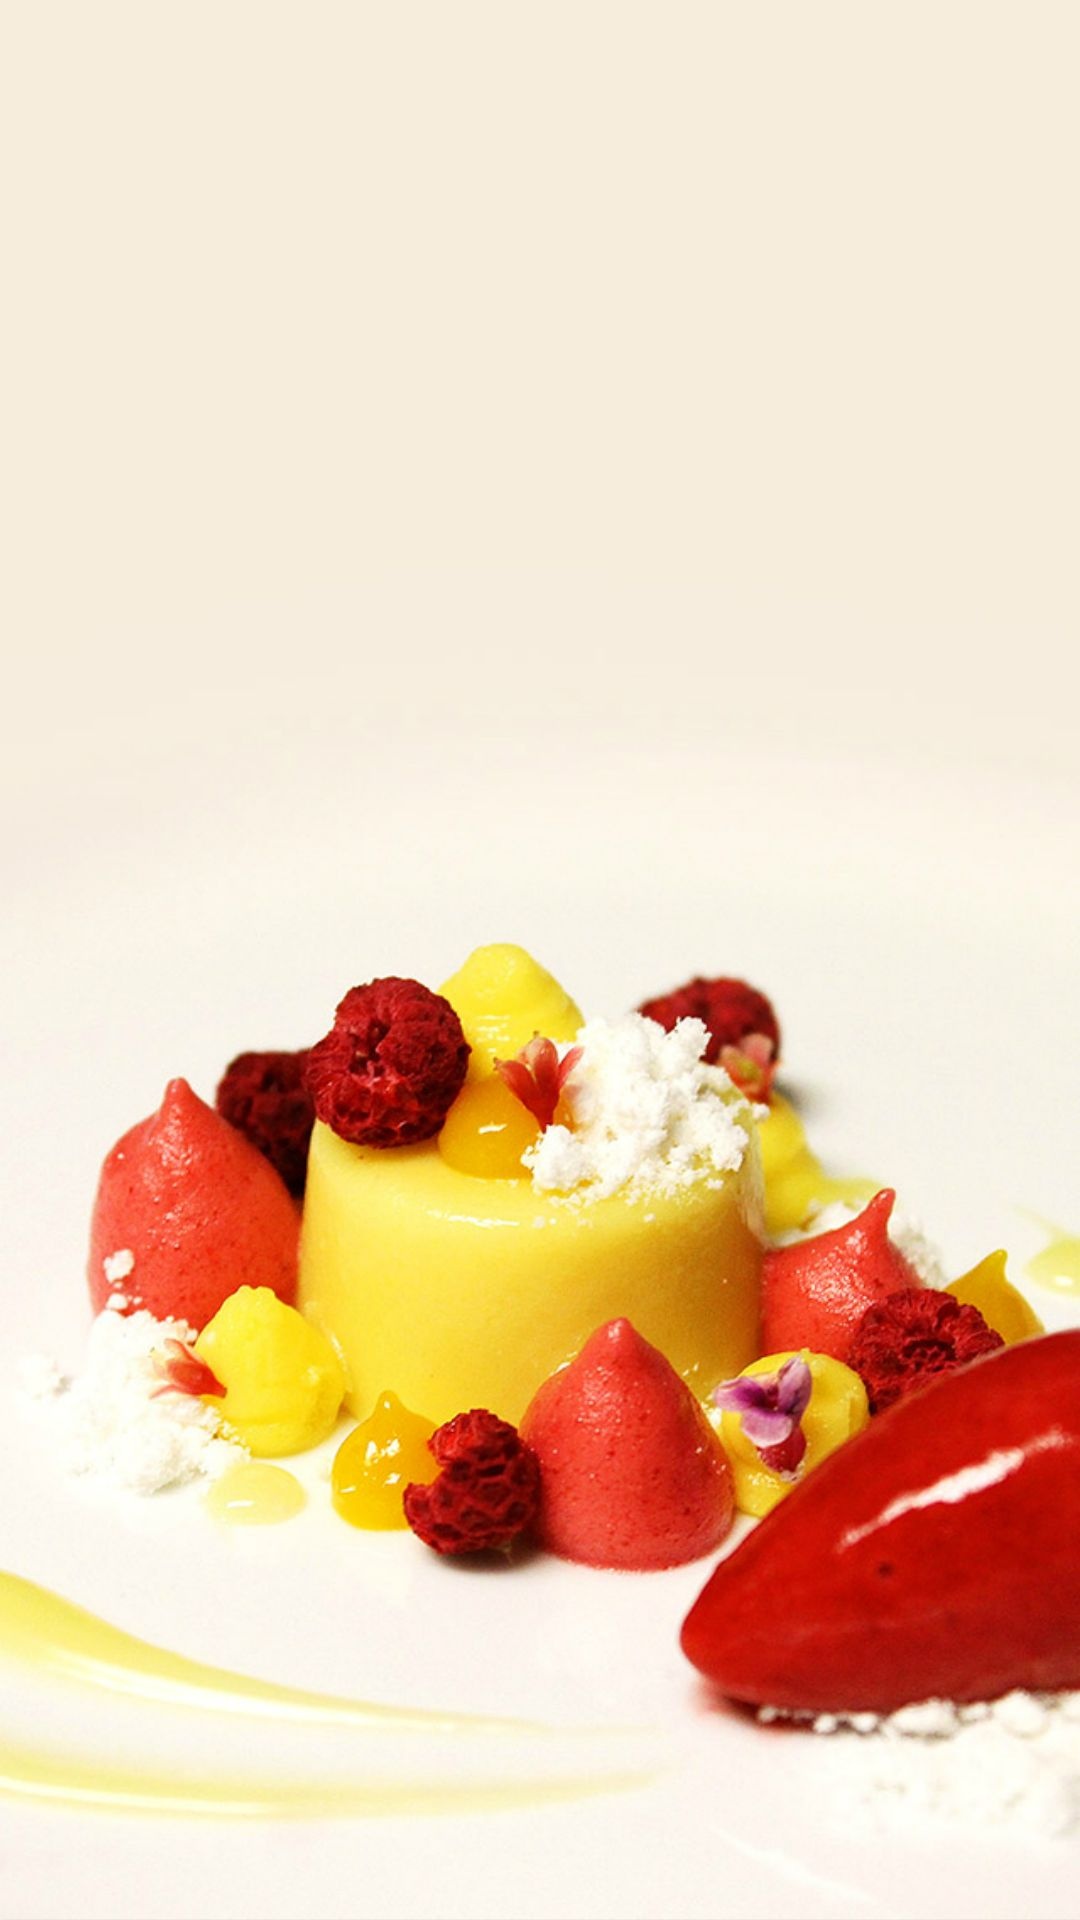 Yummy fruit pudding dessert, Colorful and refreshing, Delicious iPhone wallpaper, Tempting fruit treats, 1080x1920 Full HD Phone